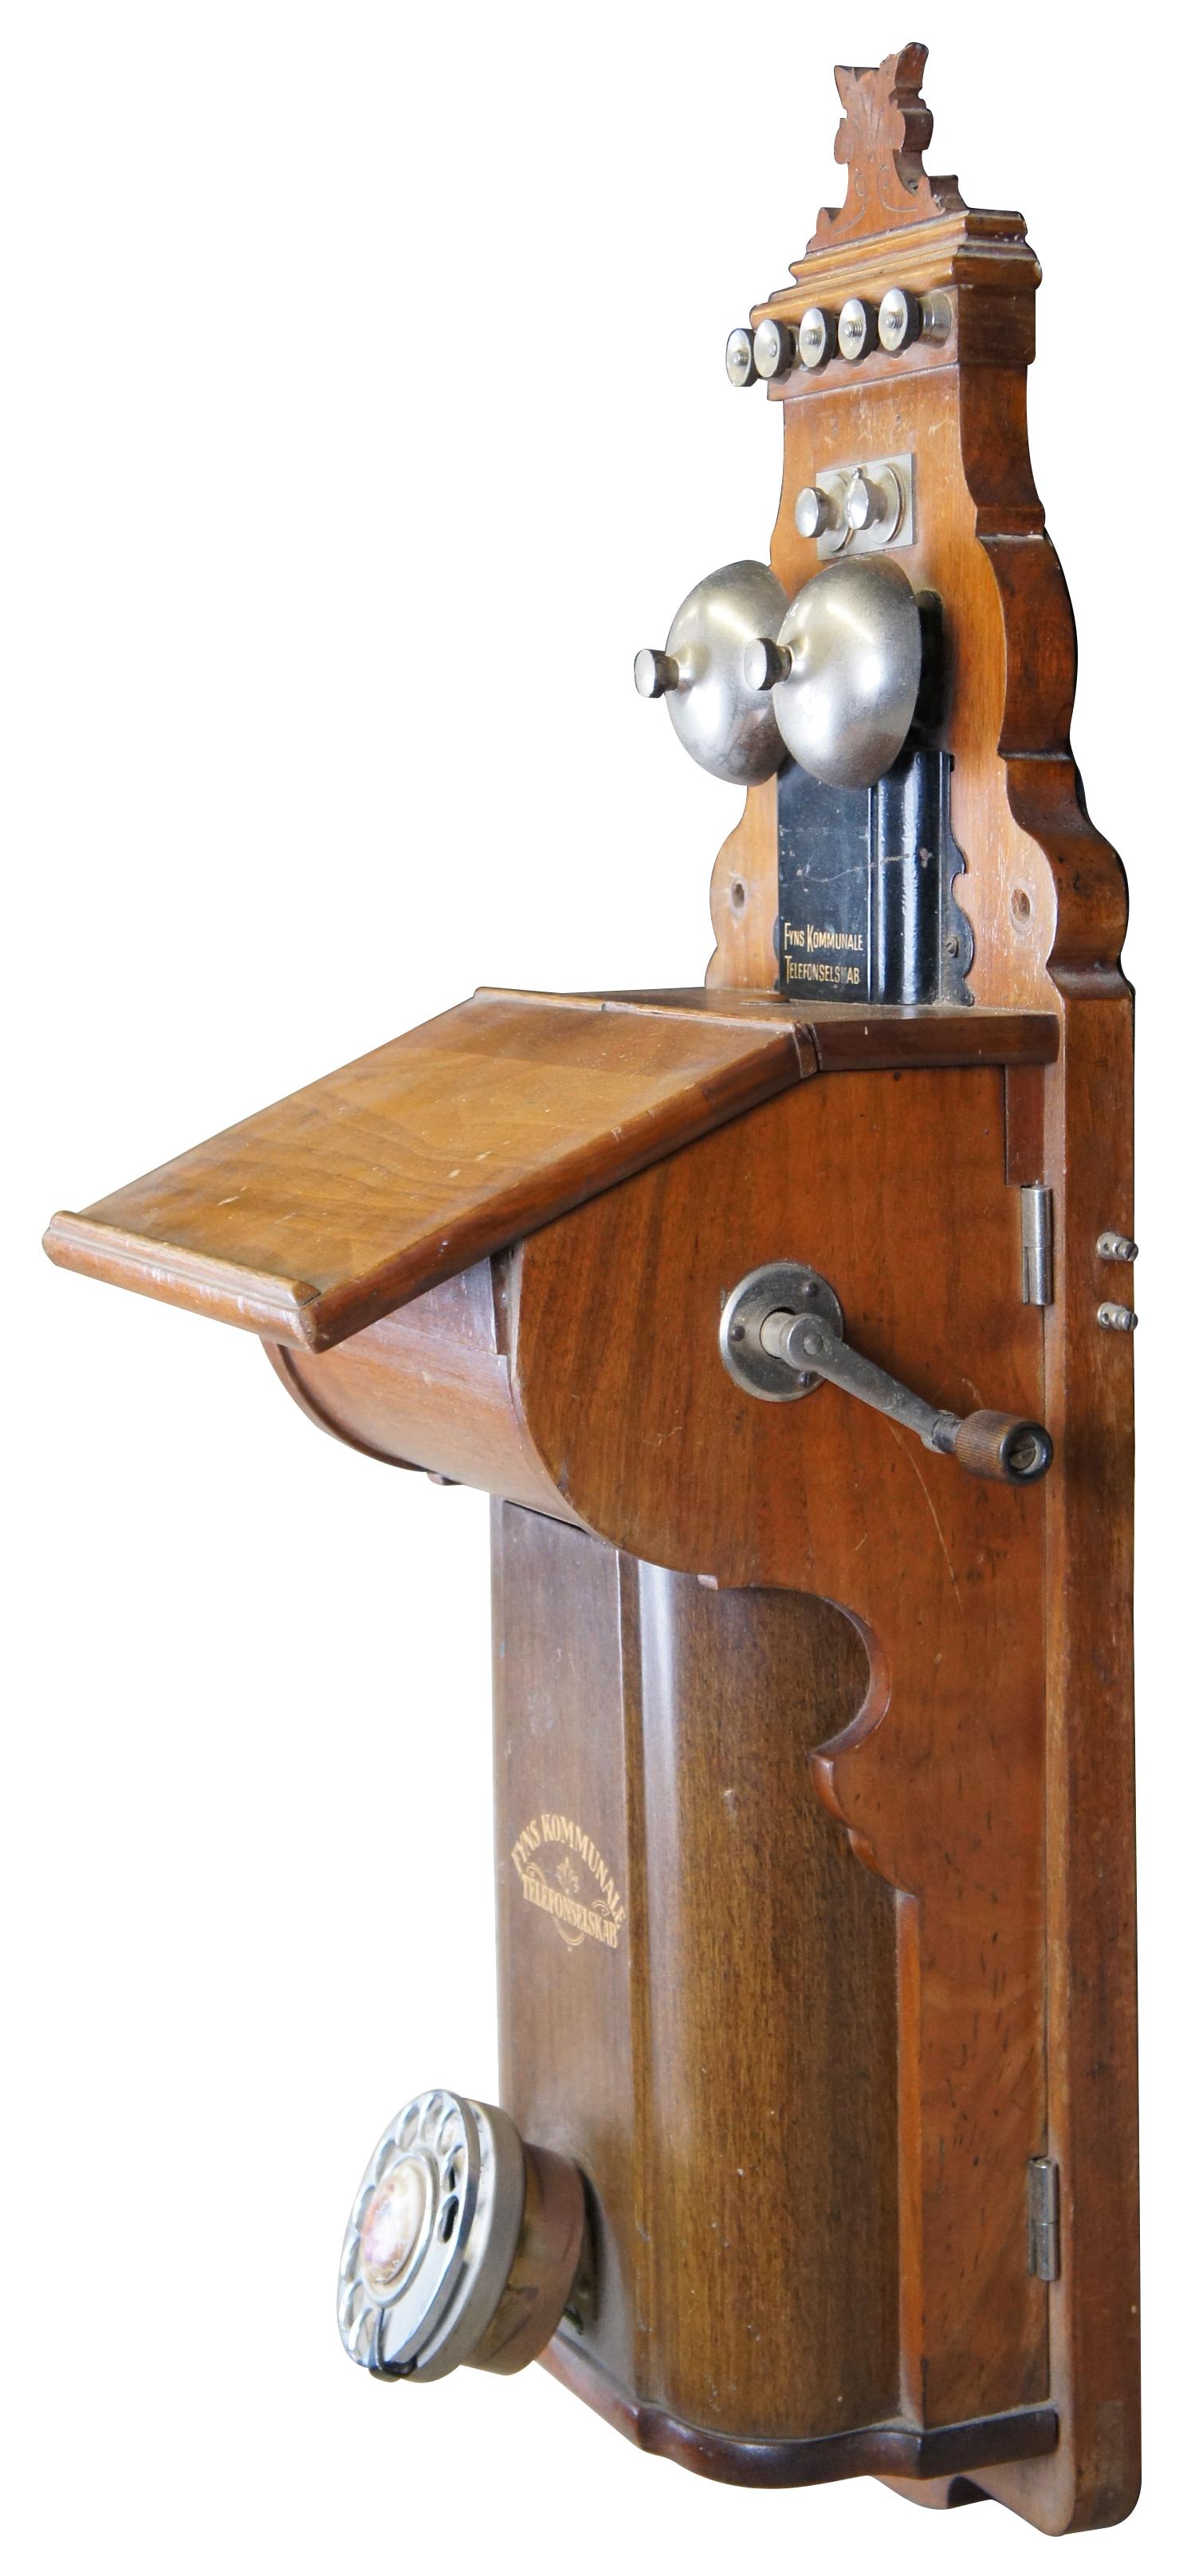 Antique Danish Edwardian Emil Moller wall phone featuring oak case with Aesthetic styling and double bell. Fyrs Kommurale. Circa 1910. Measure: 27